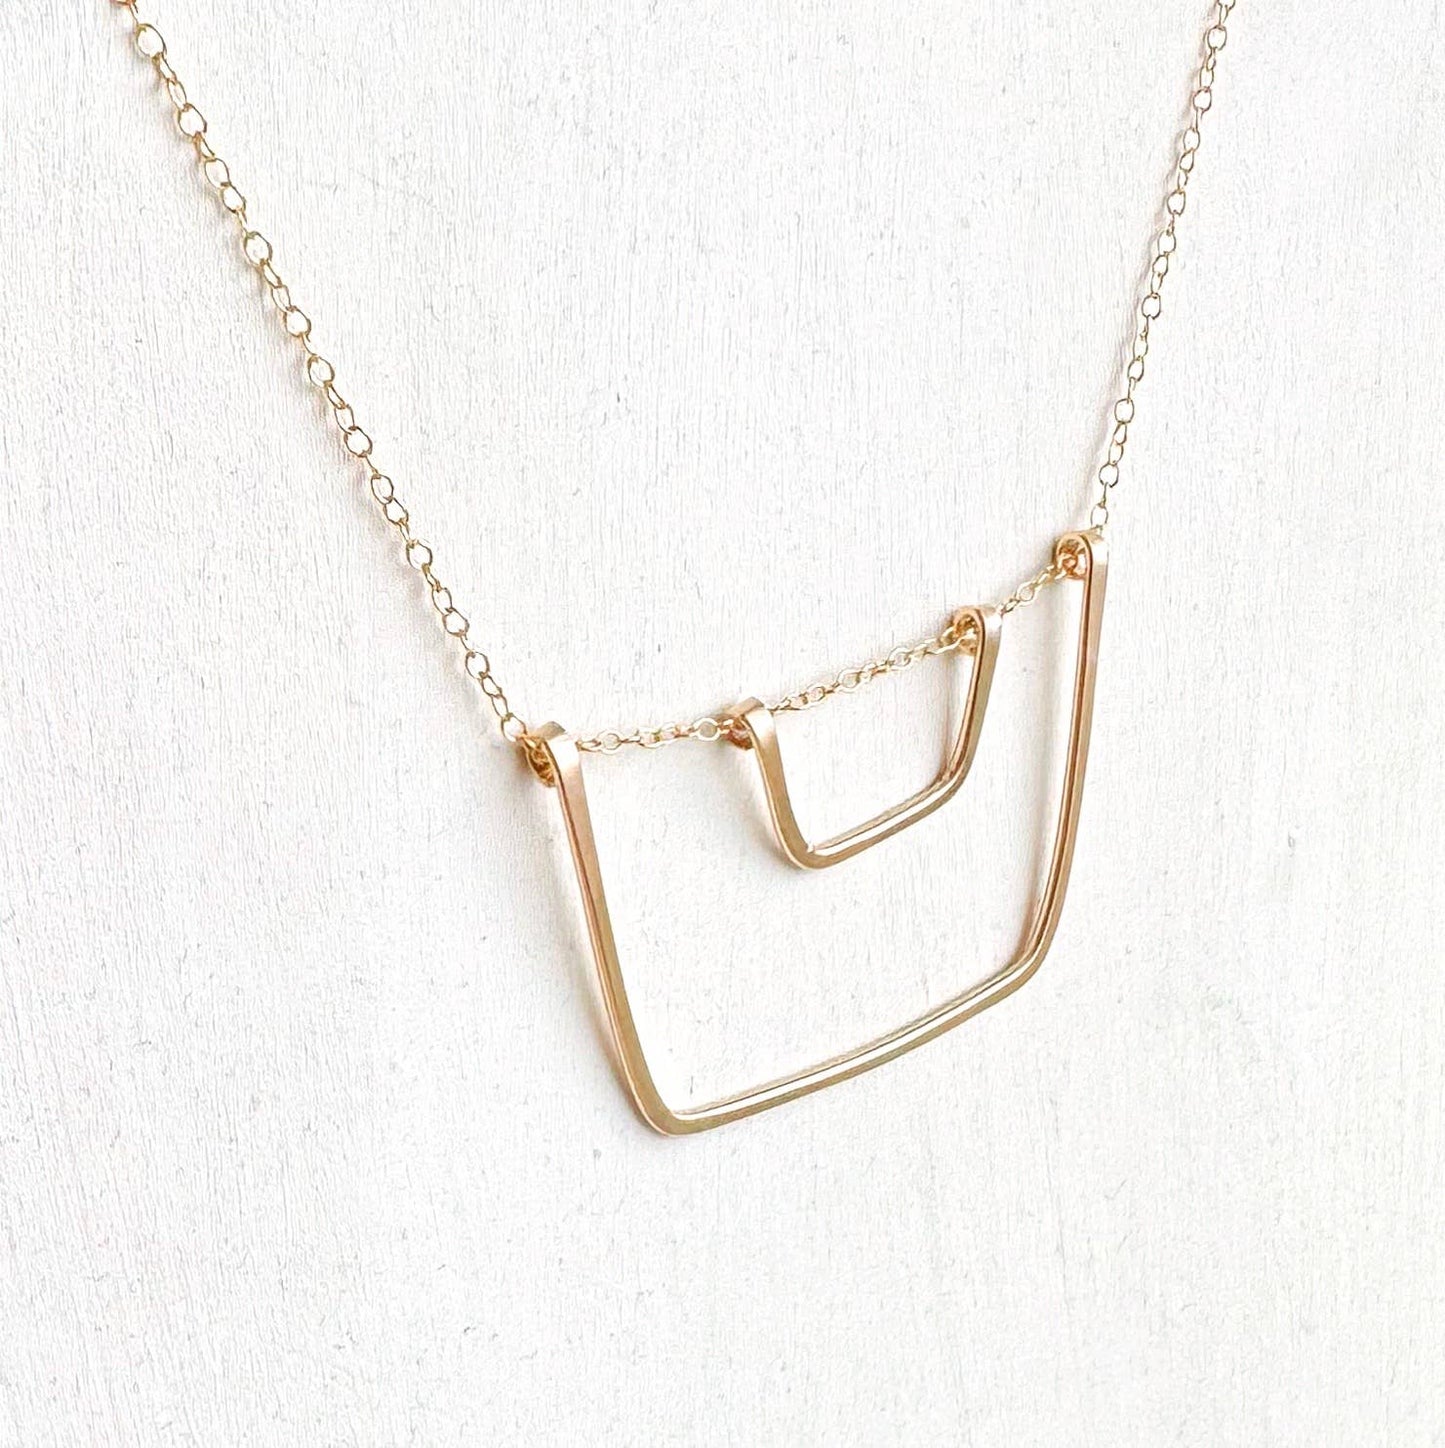 Bold Bucket & Pail Geometric Squares Handmade Necklace: Gold filled / 16"